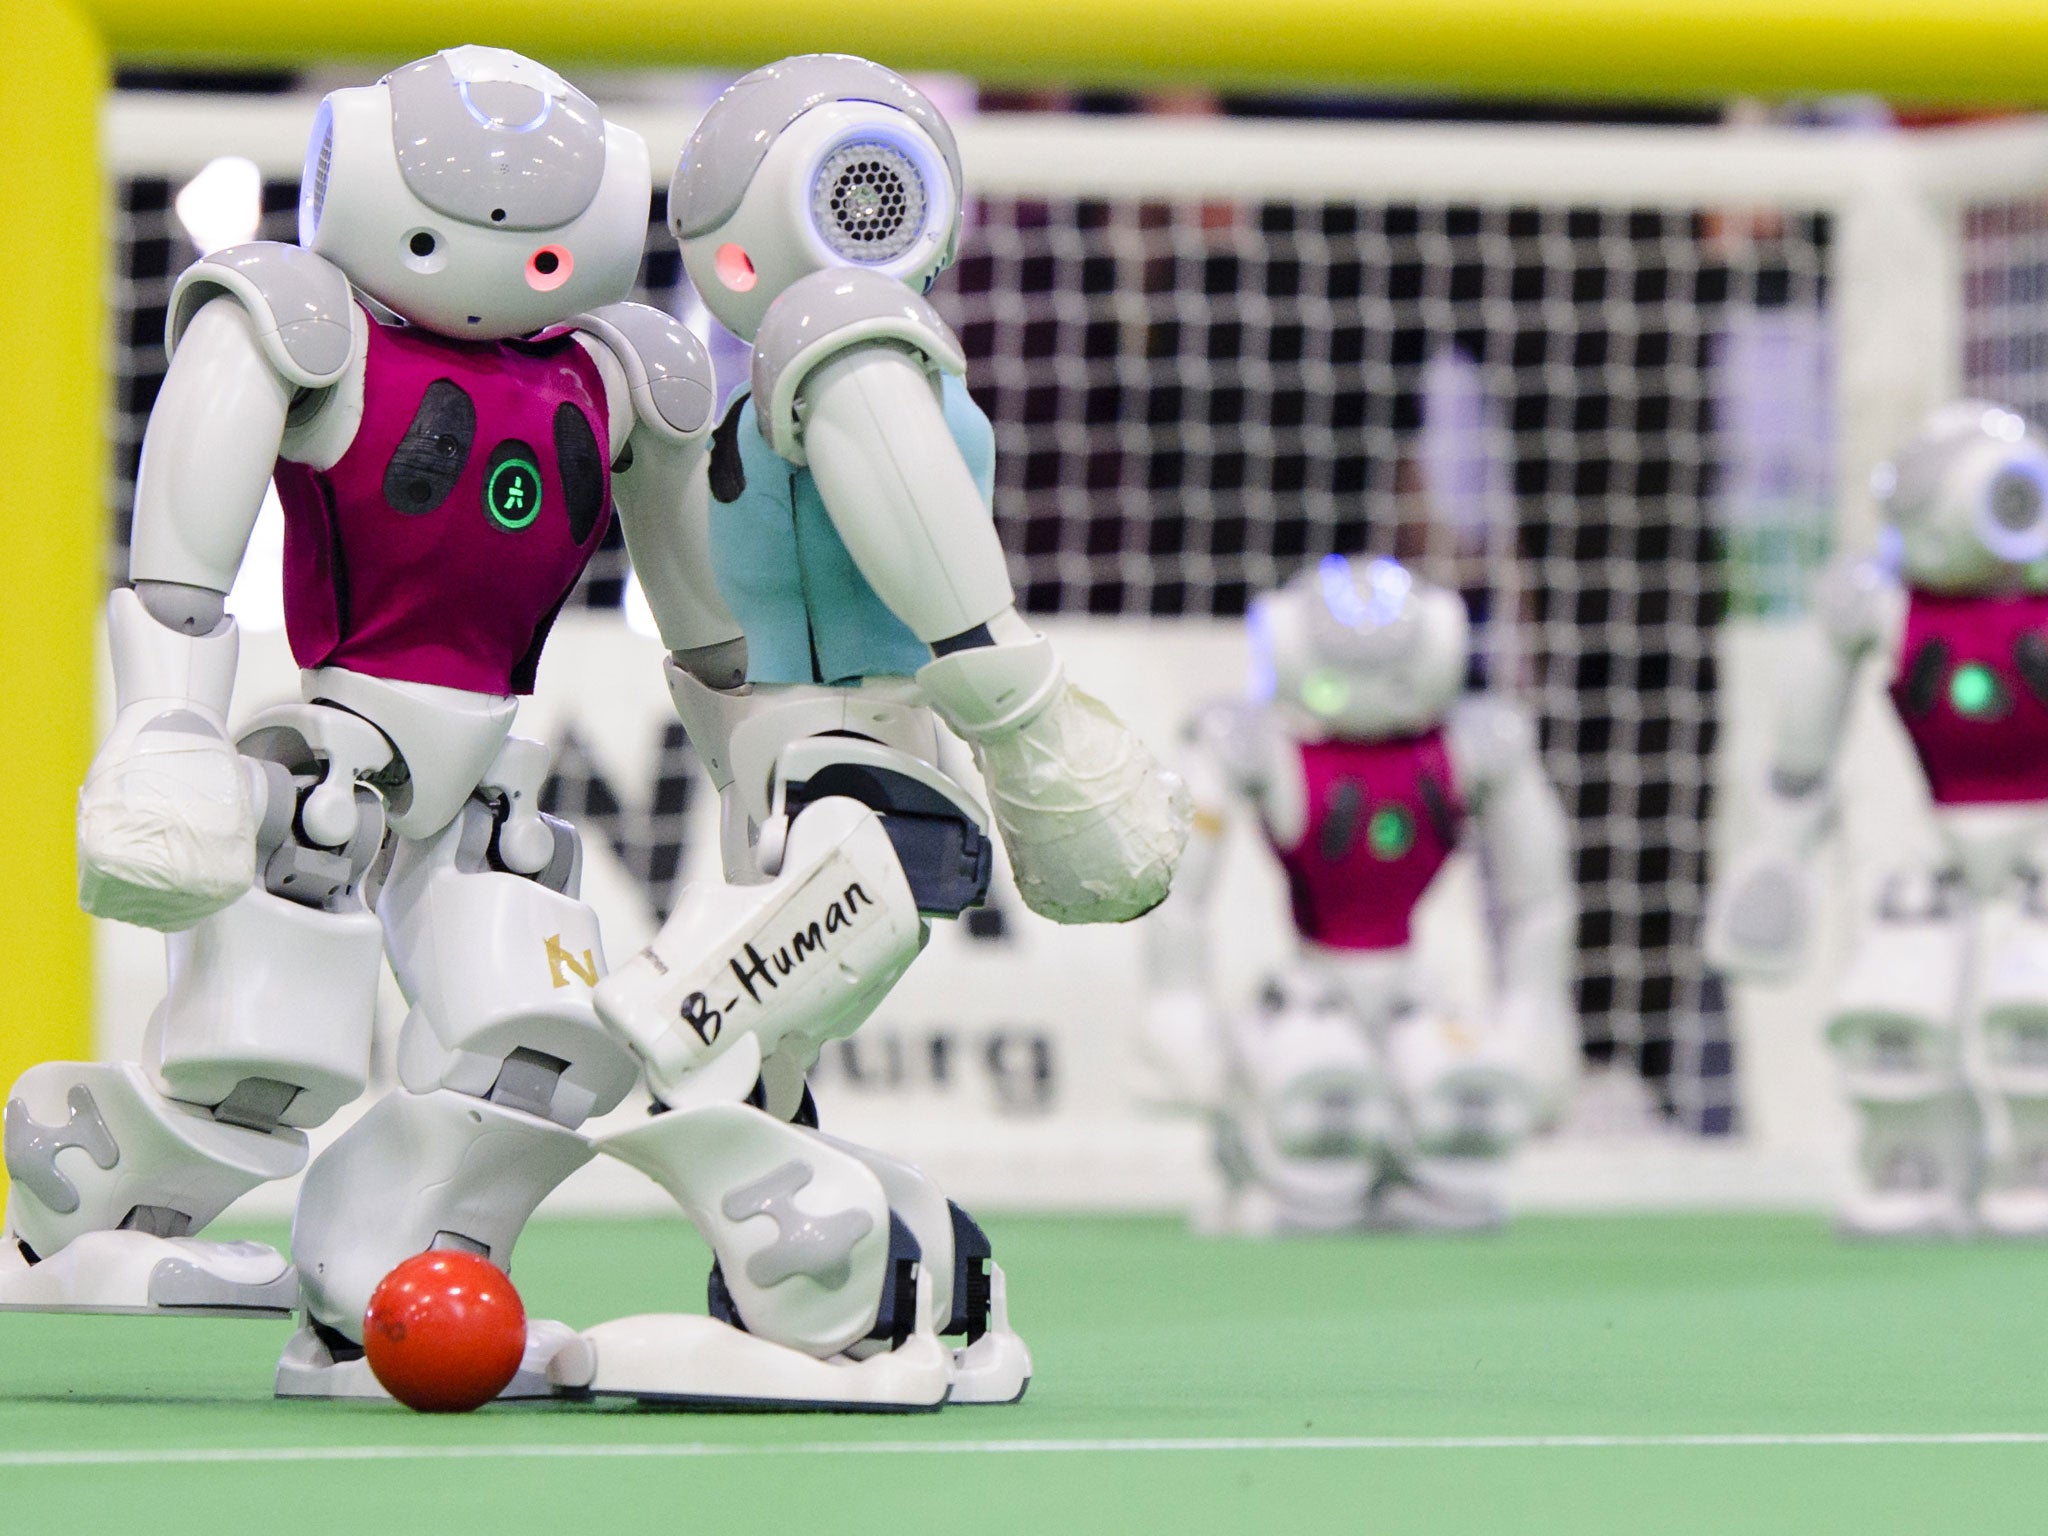 Two teams of robots play against each other in the 2014 RoboCup German Open tournament on April 03, 2014 in Magdeburg, Germany.